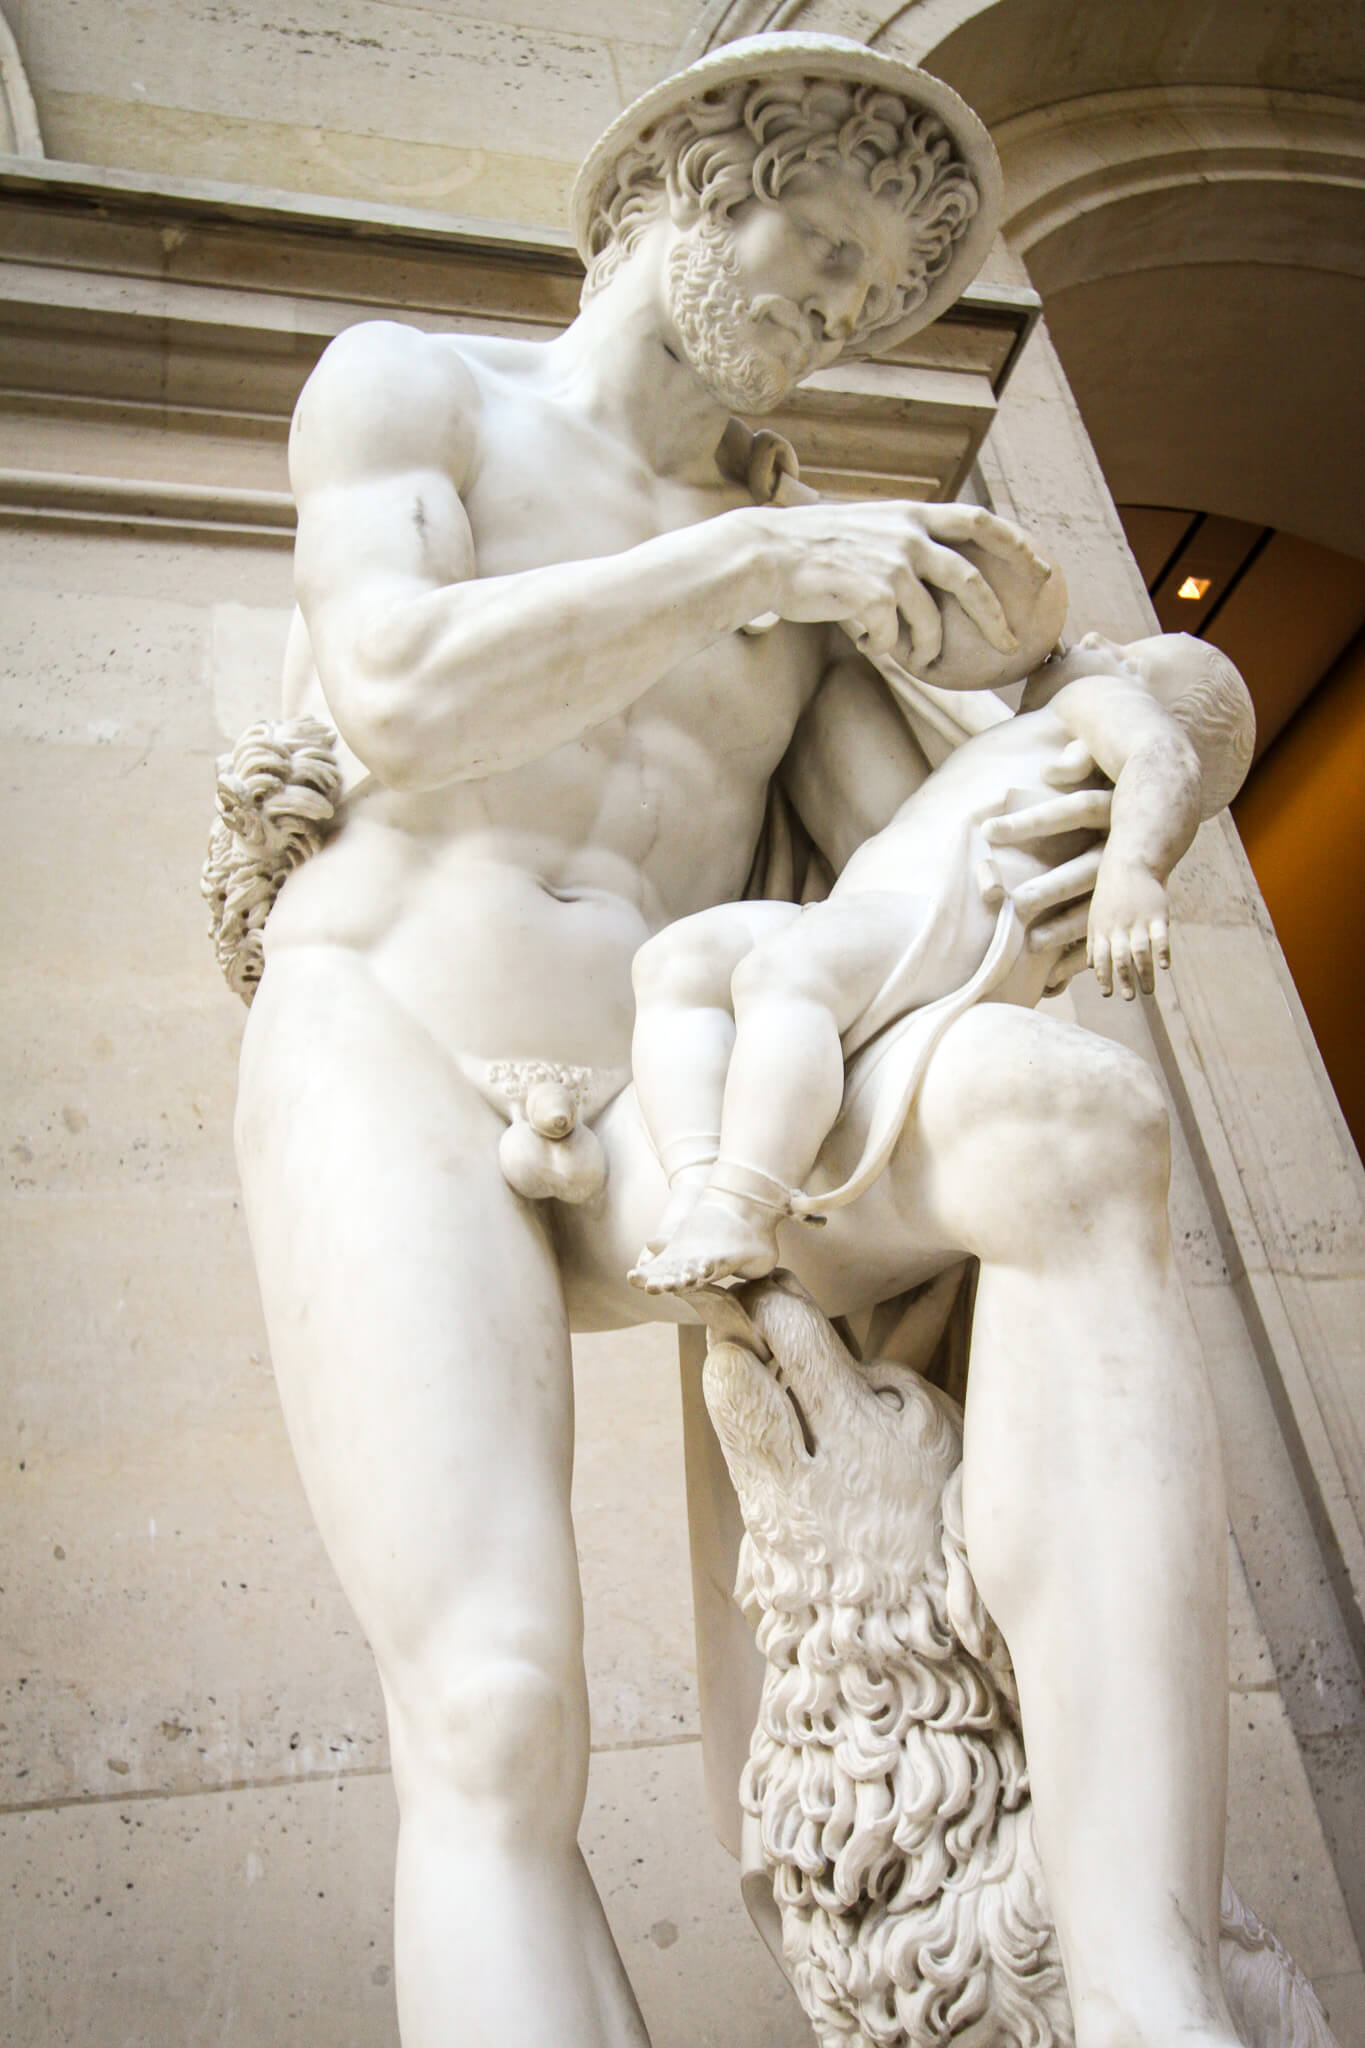 A statue of a shepherd holding a baby as a dog licks its toes, in the Louvre museum